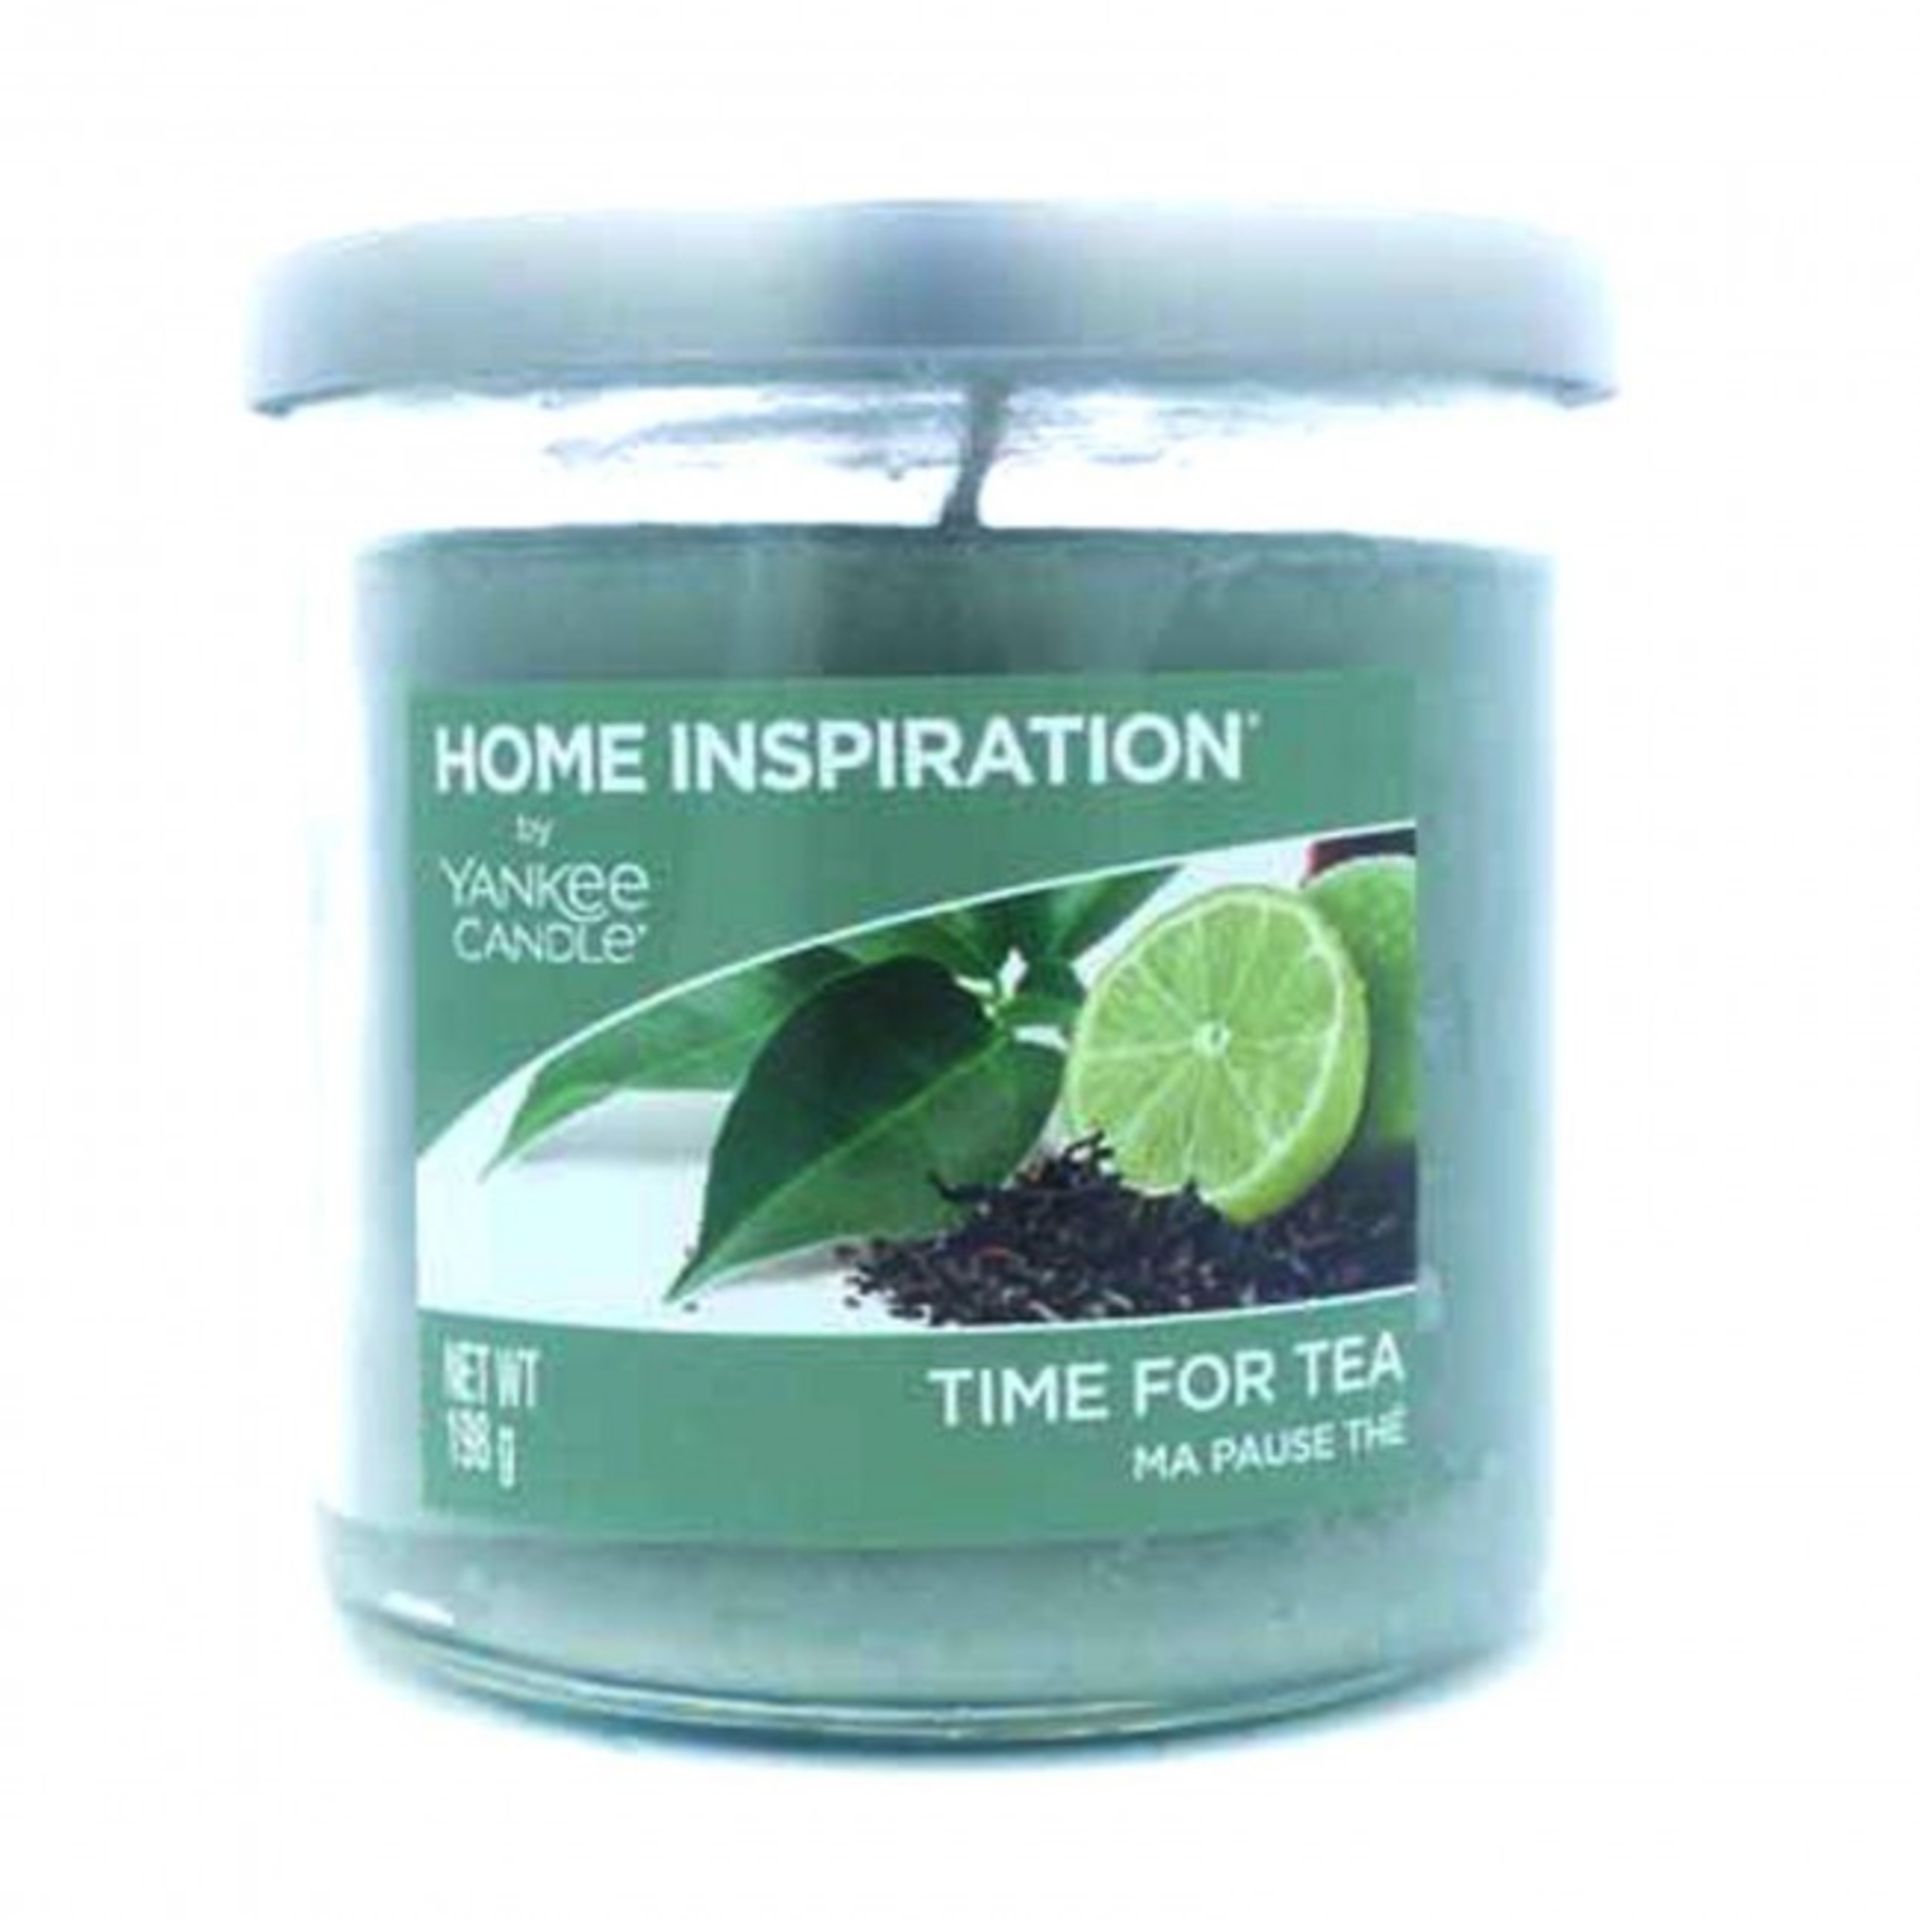 + VAT Brand New Home Inspiration by Yankee Candle Time for Tea 198g Tumbler Candle - ISP £7.99 Ebay